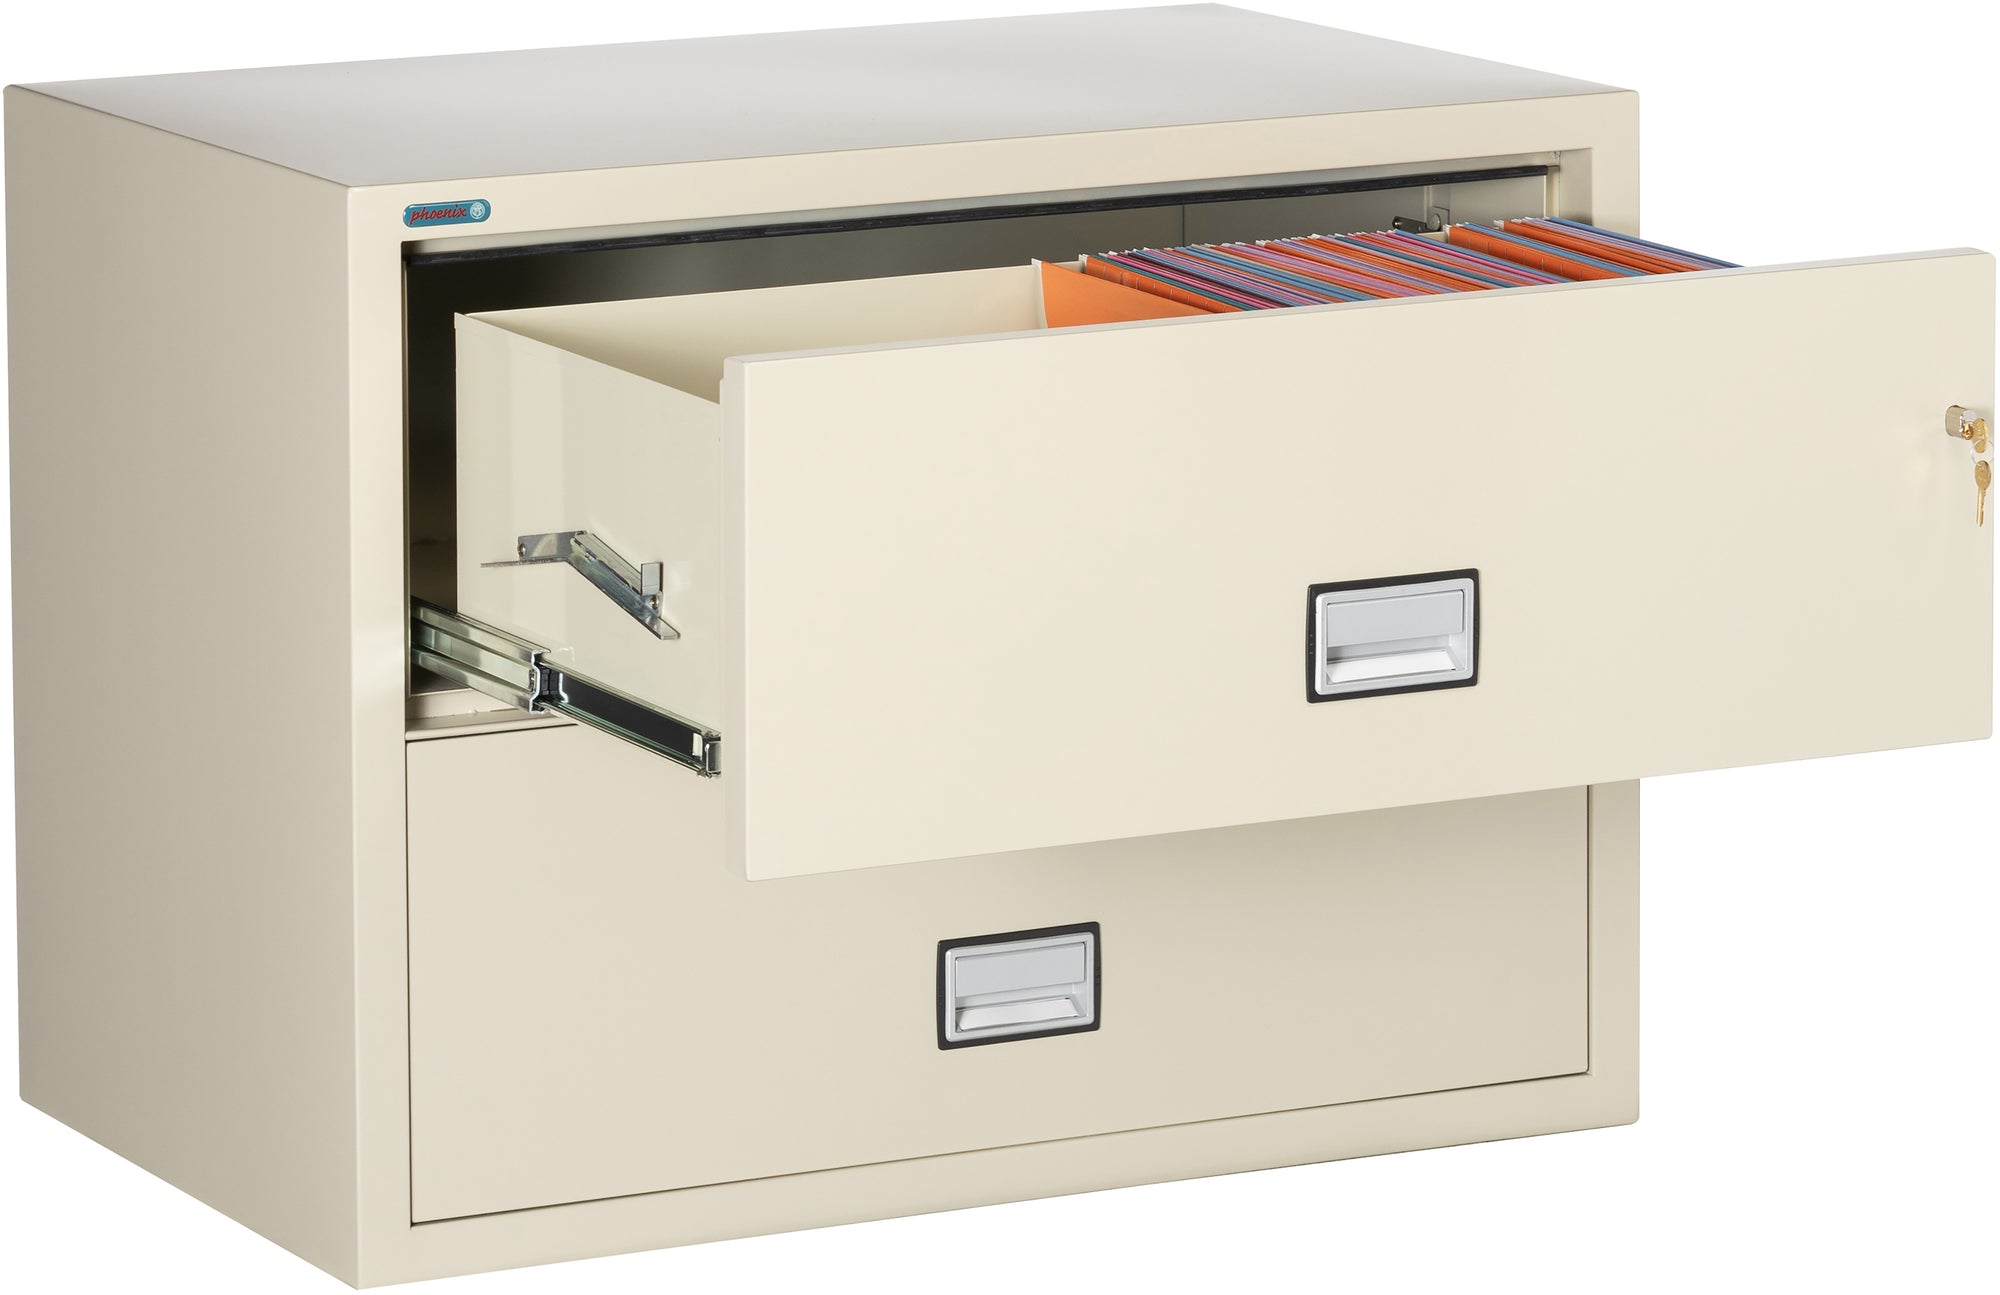 Phoenix Safe LAT2W38 38" 2 Drawer Lateral Size Fire File Cabinet Putty